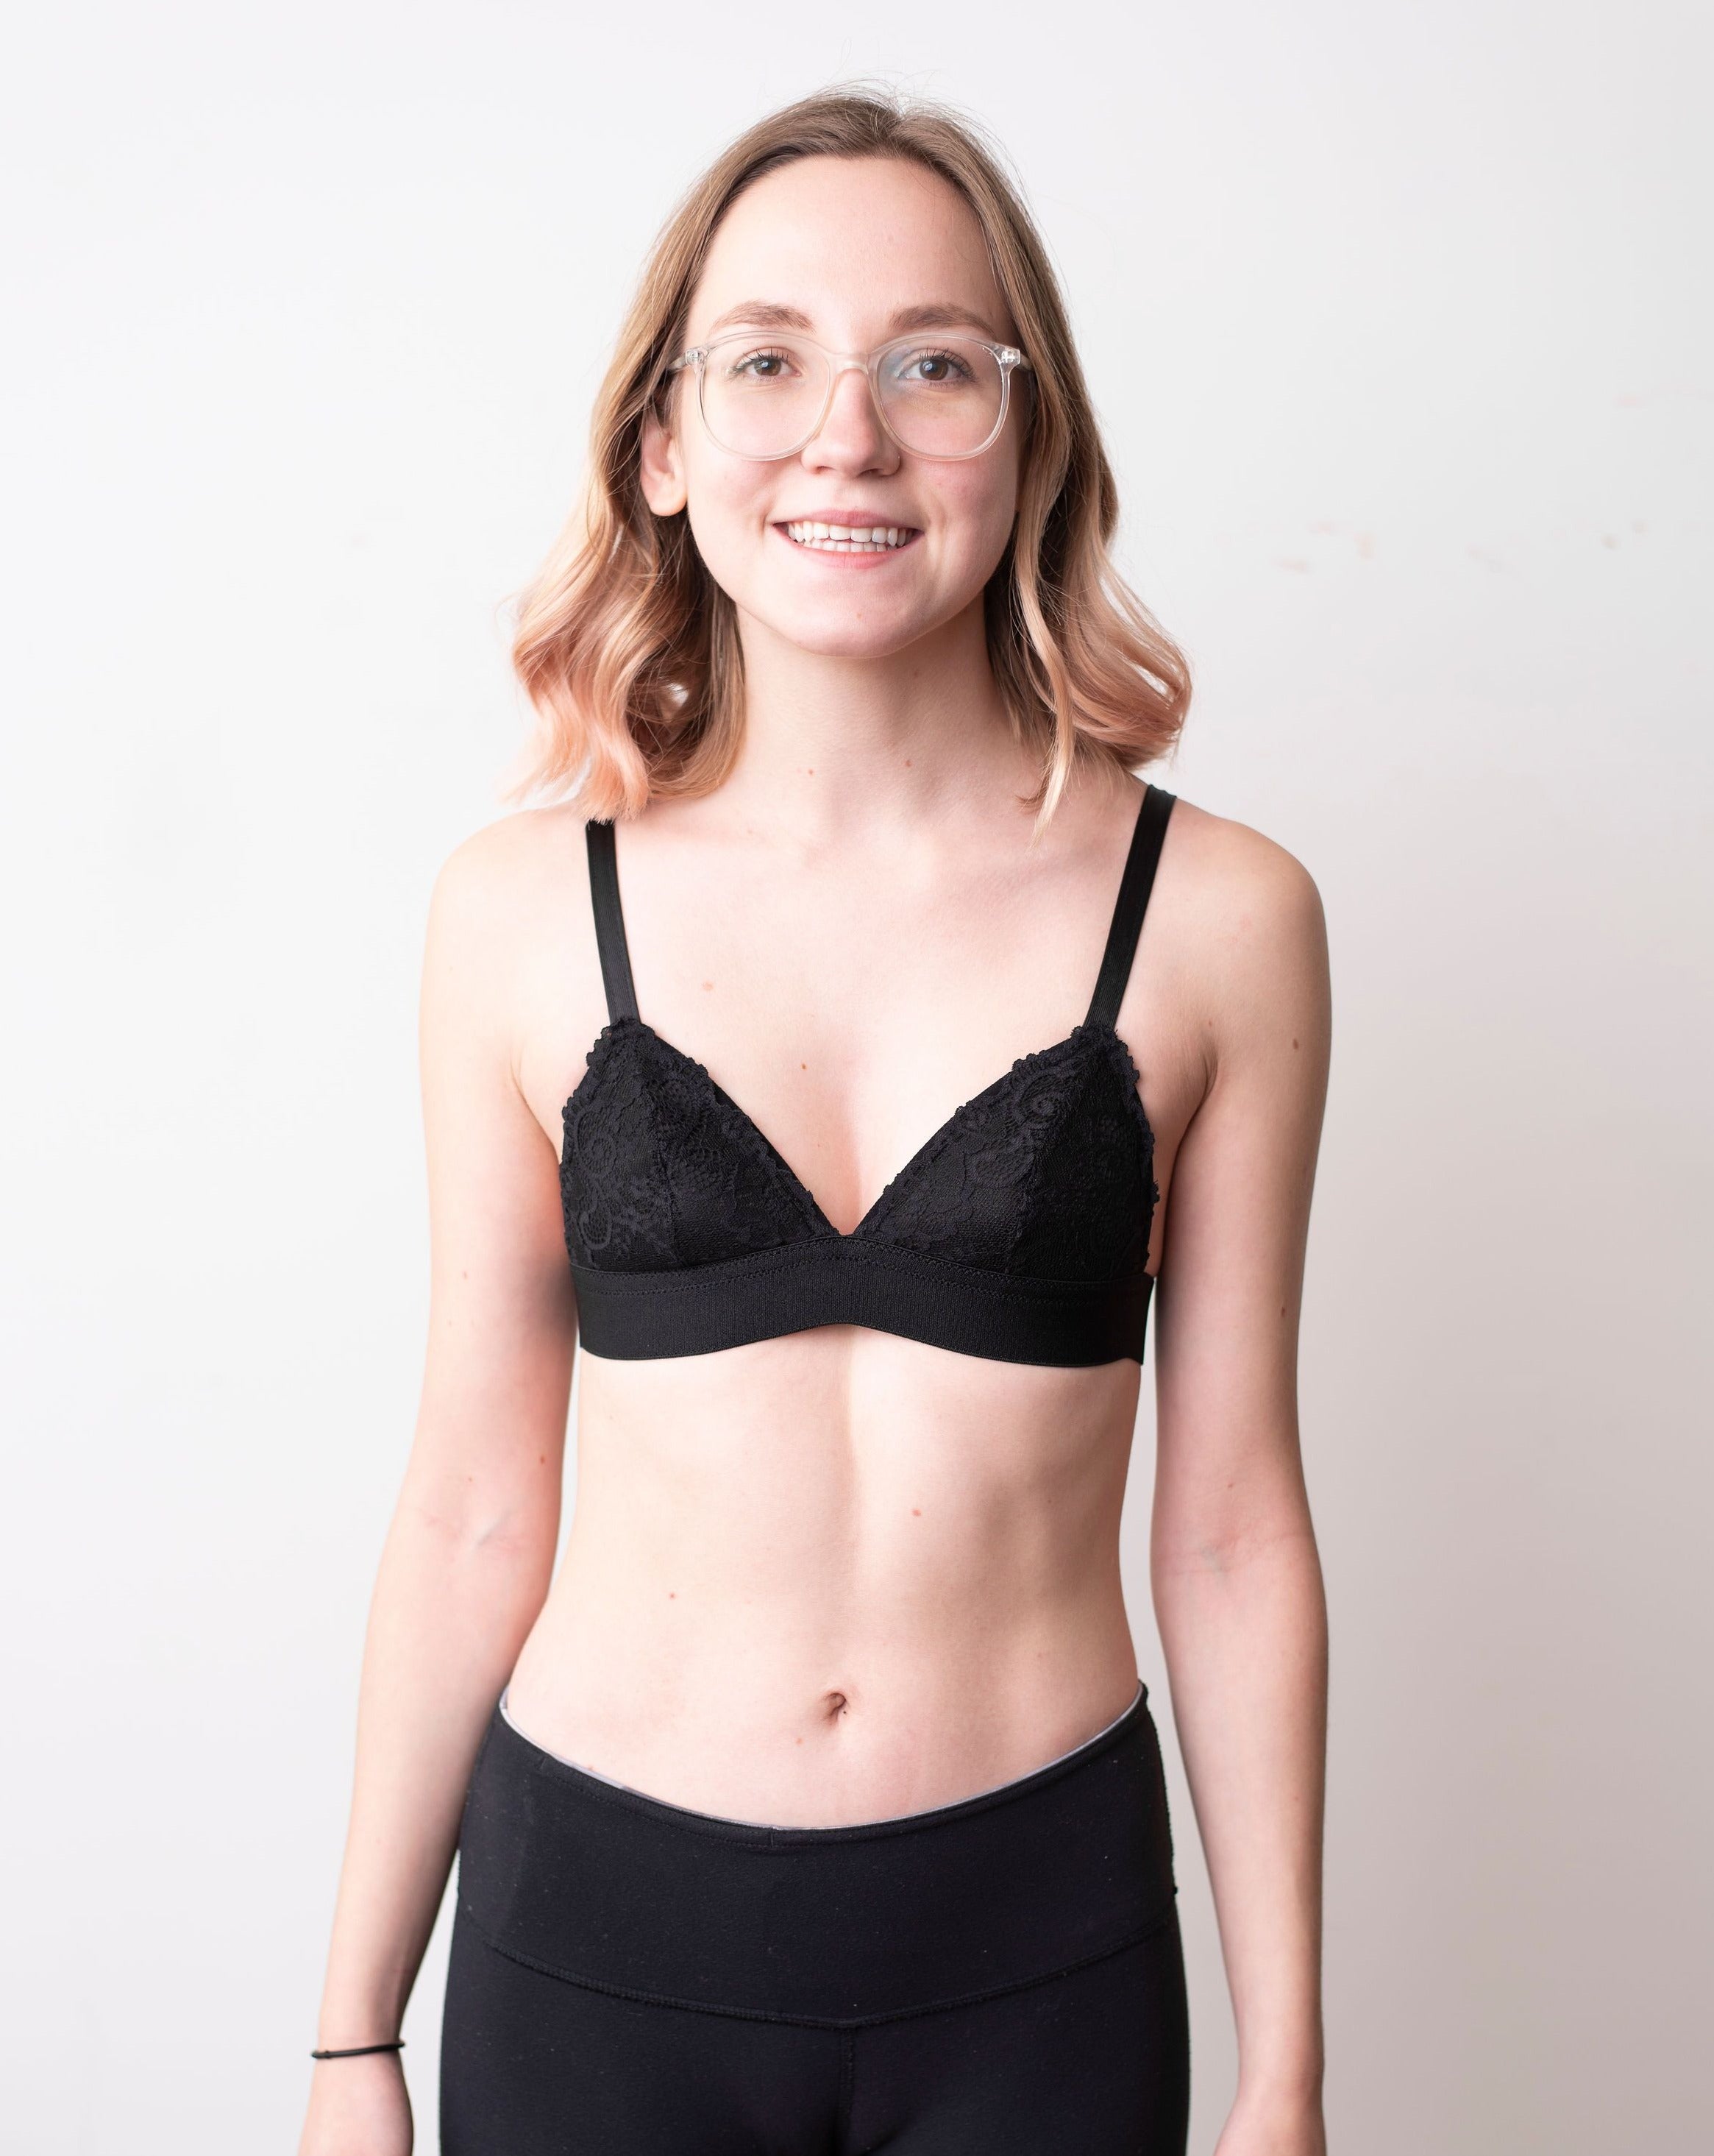 Girls Teenage Bras - Browse Products - The Factory Outlet